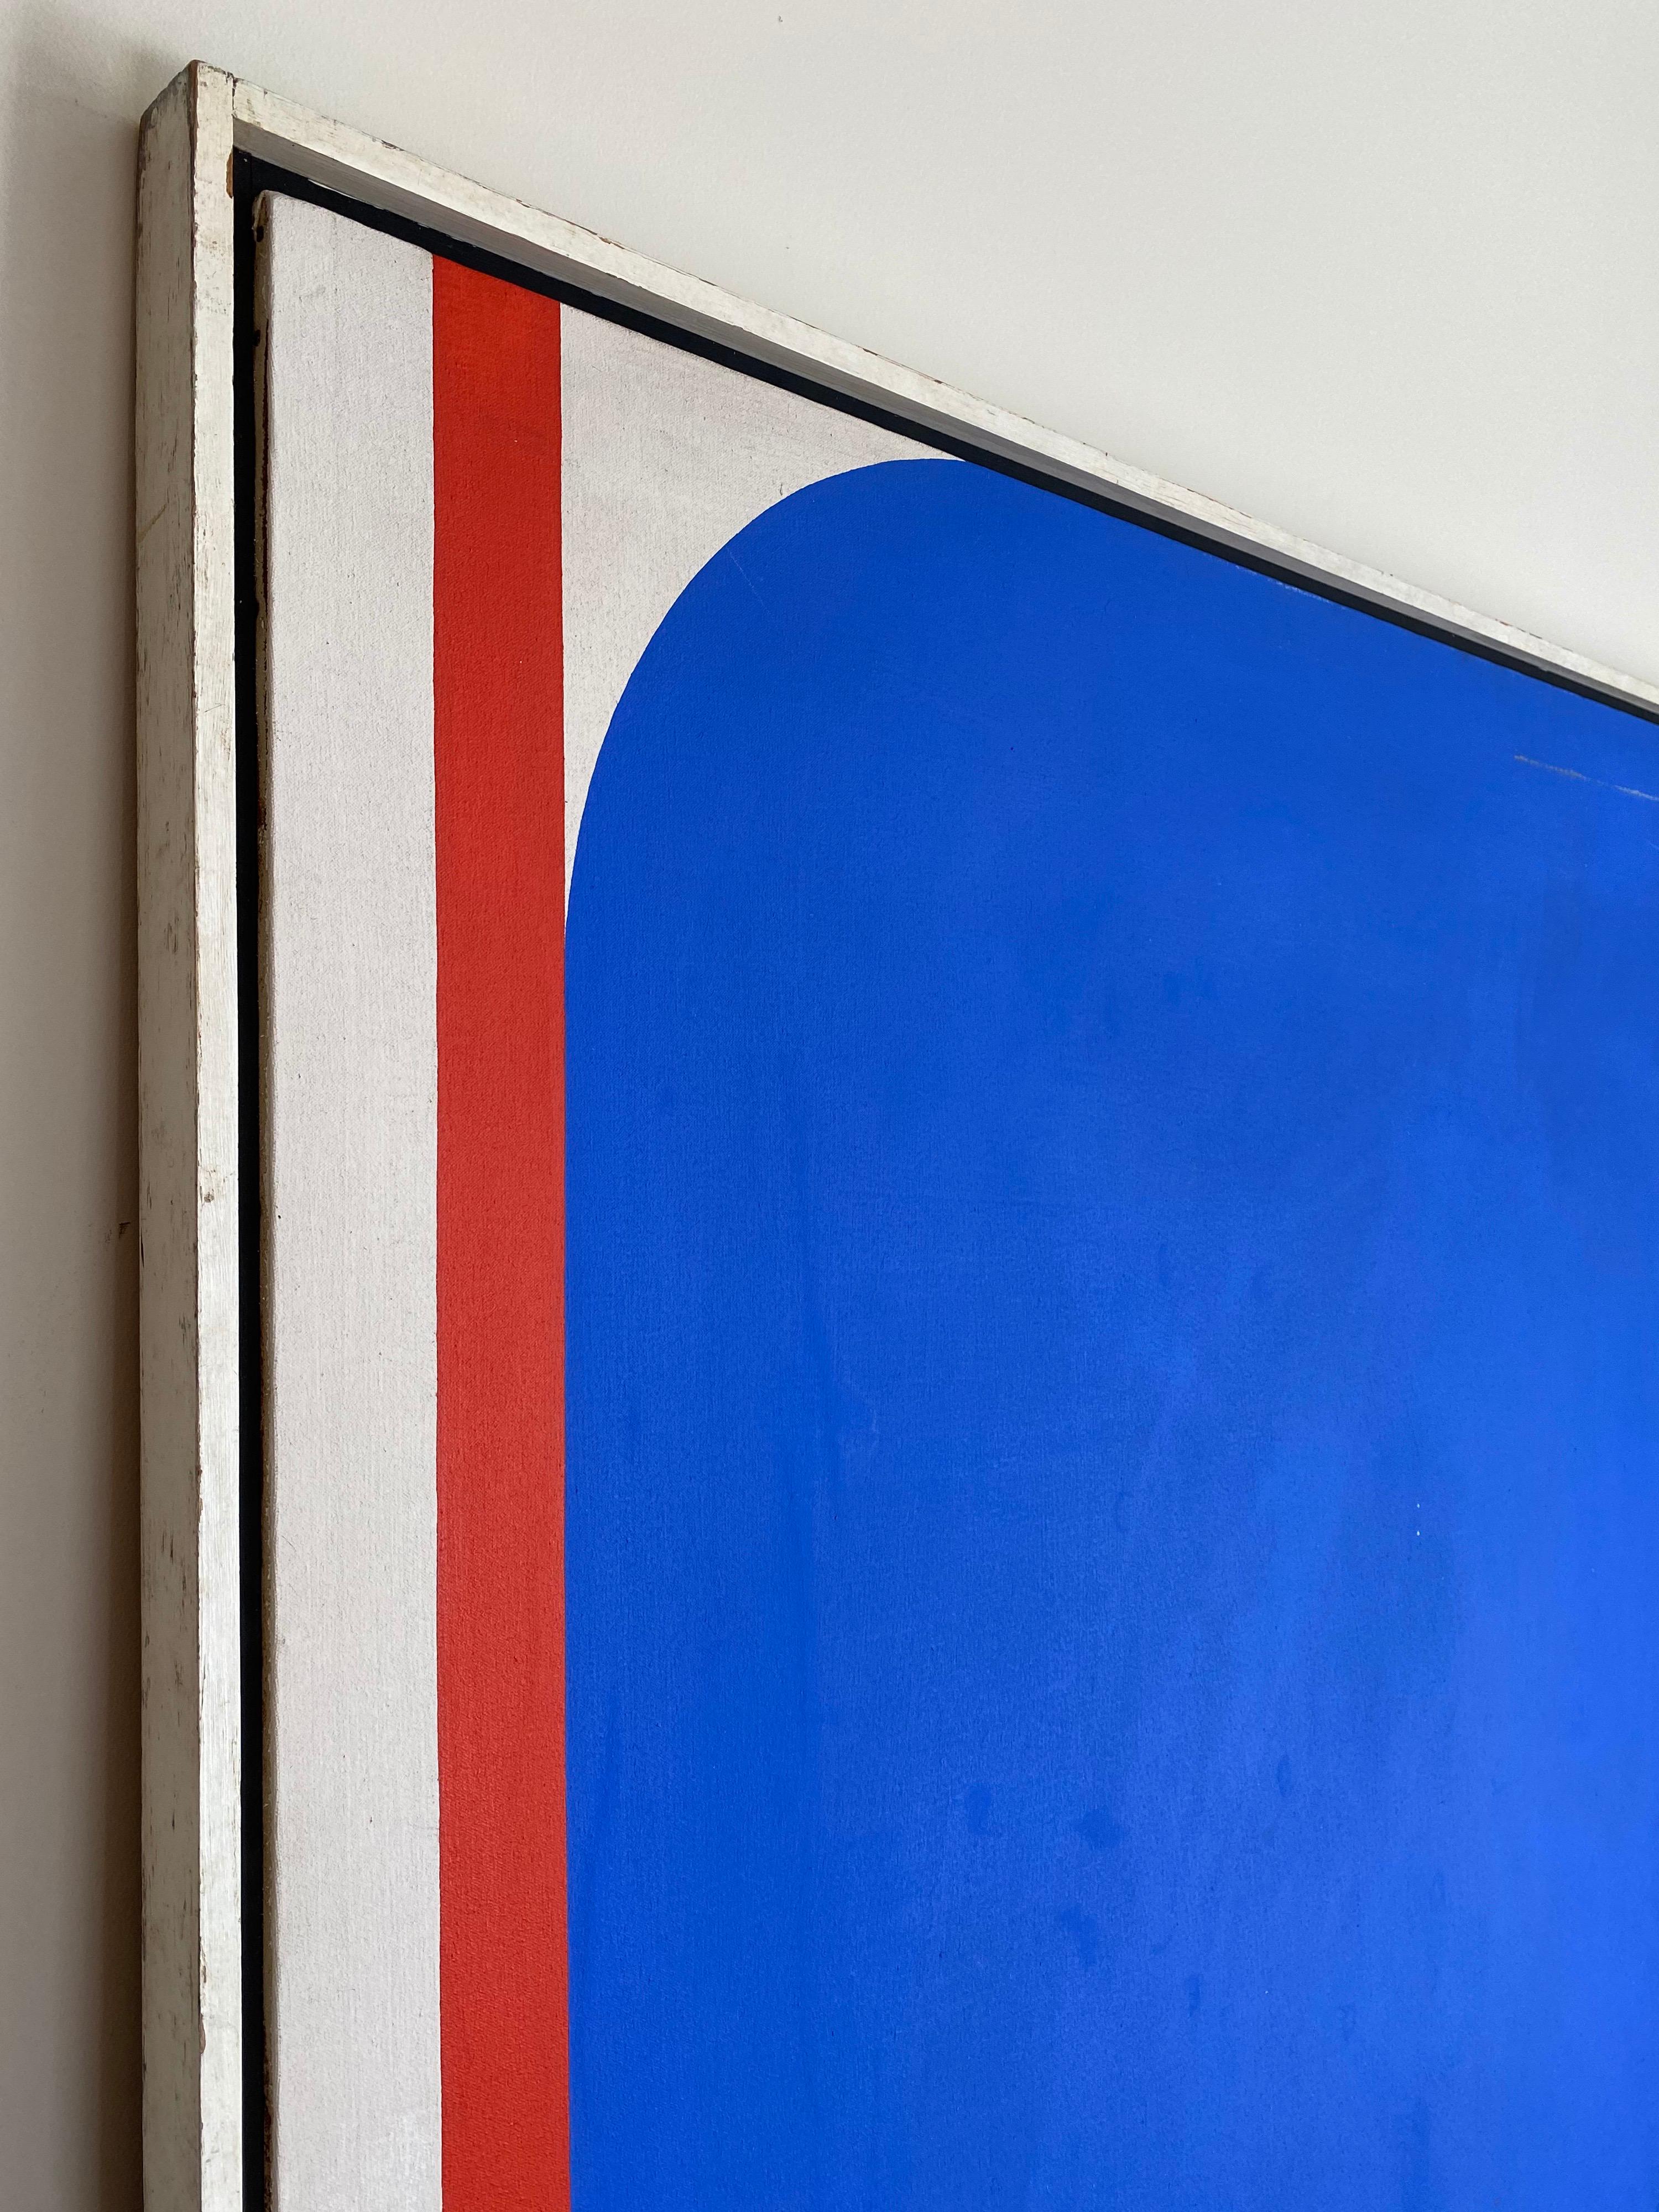 Vivid blue with contrasting green and red create the illusion of depth and movement in this outstanding painting. This piece hung in the North Carolina Museum of Art in the 1960s.

This piece is signed and titled on the verso 